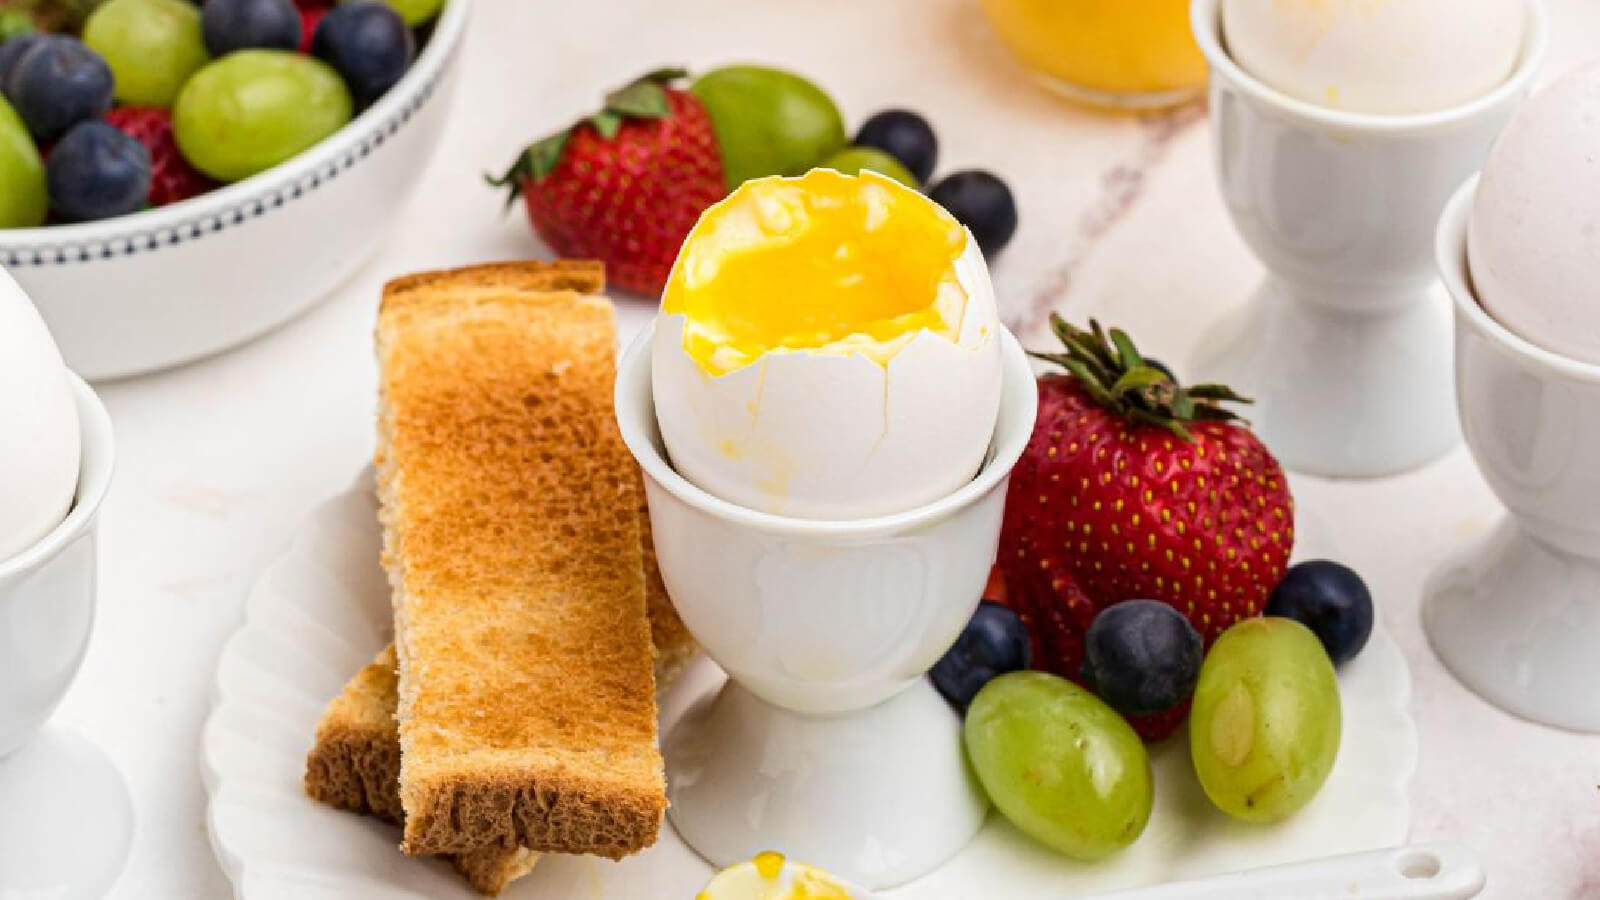 Air fryer soft boiled egg cracked open and half eaten surrounded by fruit and toast.